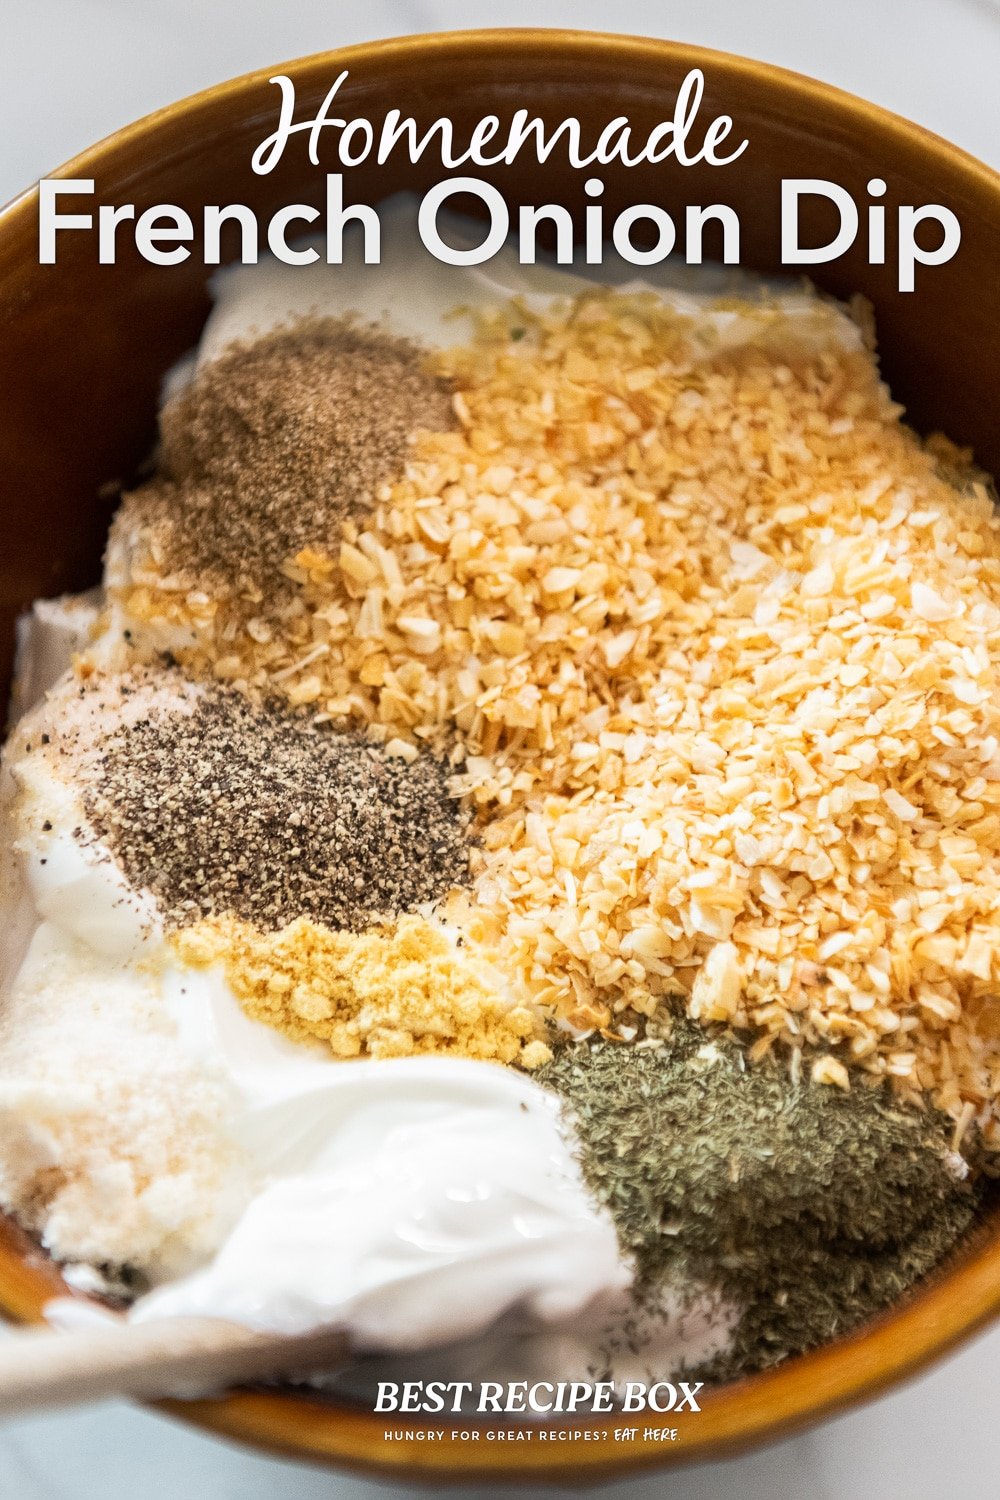 Homemade French Onion Dip Mix in 5 min from Scratch | Best Recipe Box